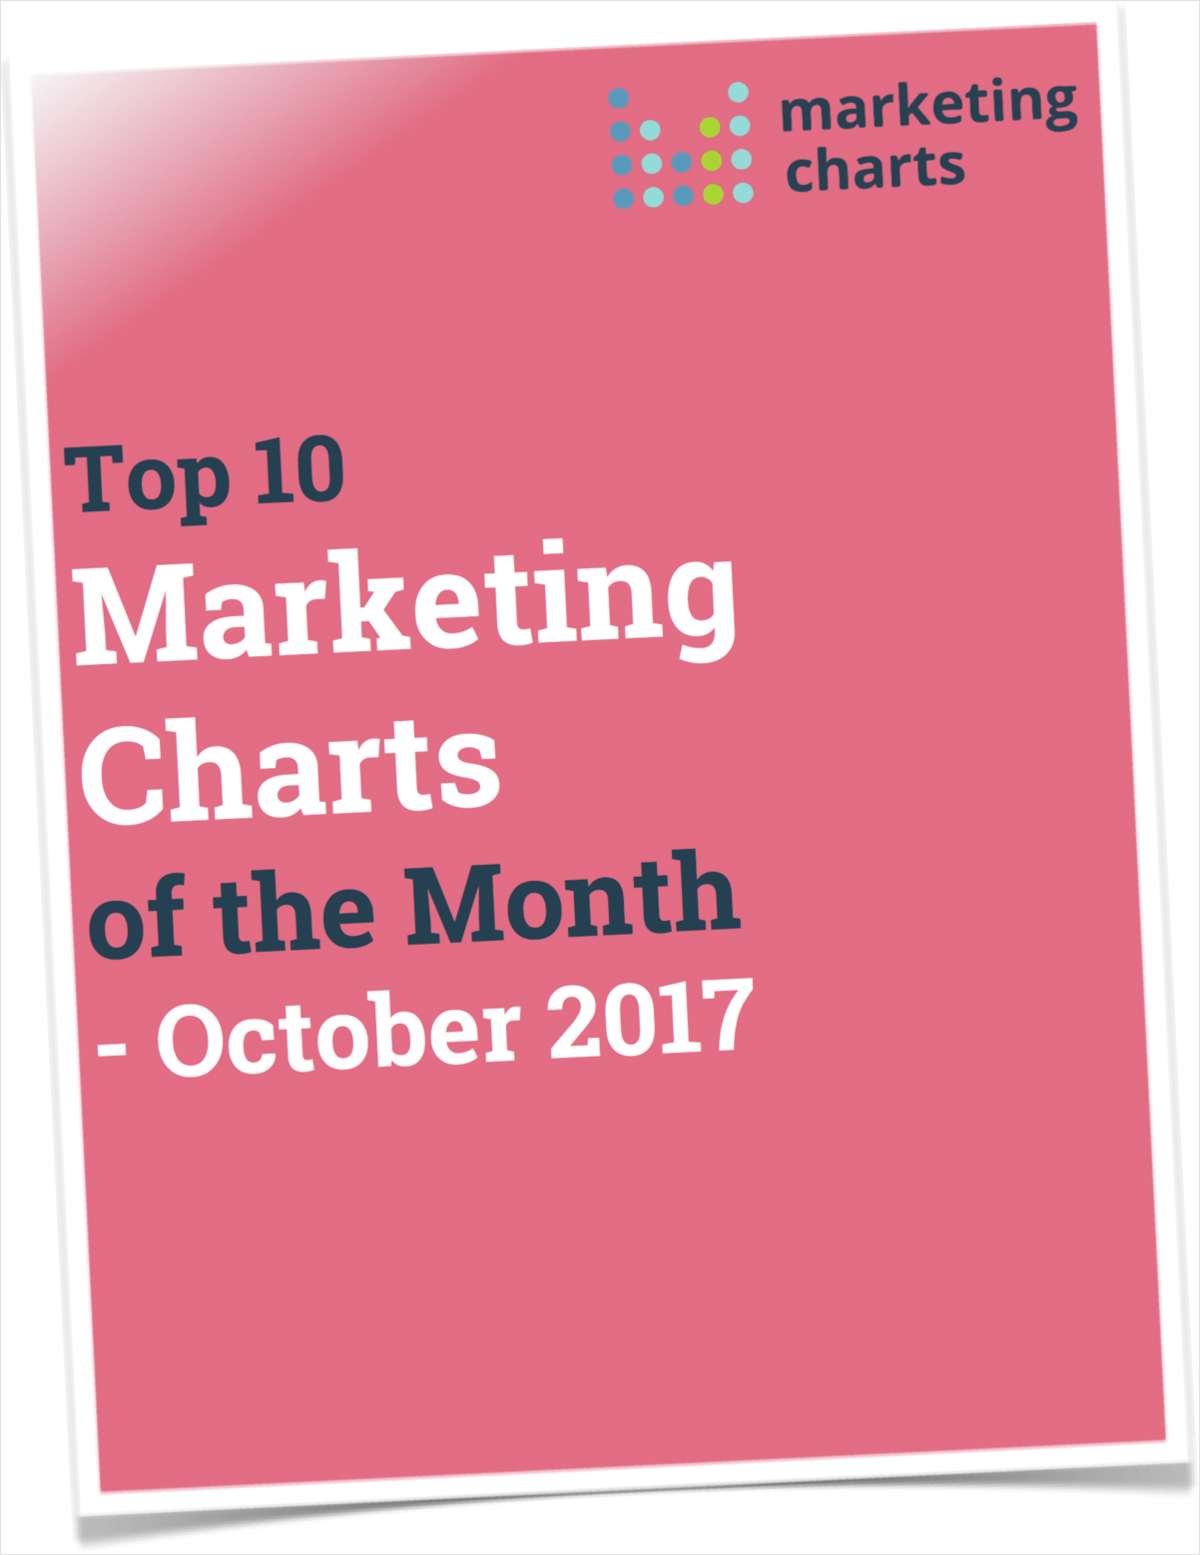 Top 10 Marketing Charts of the Month - October 2017